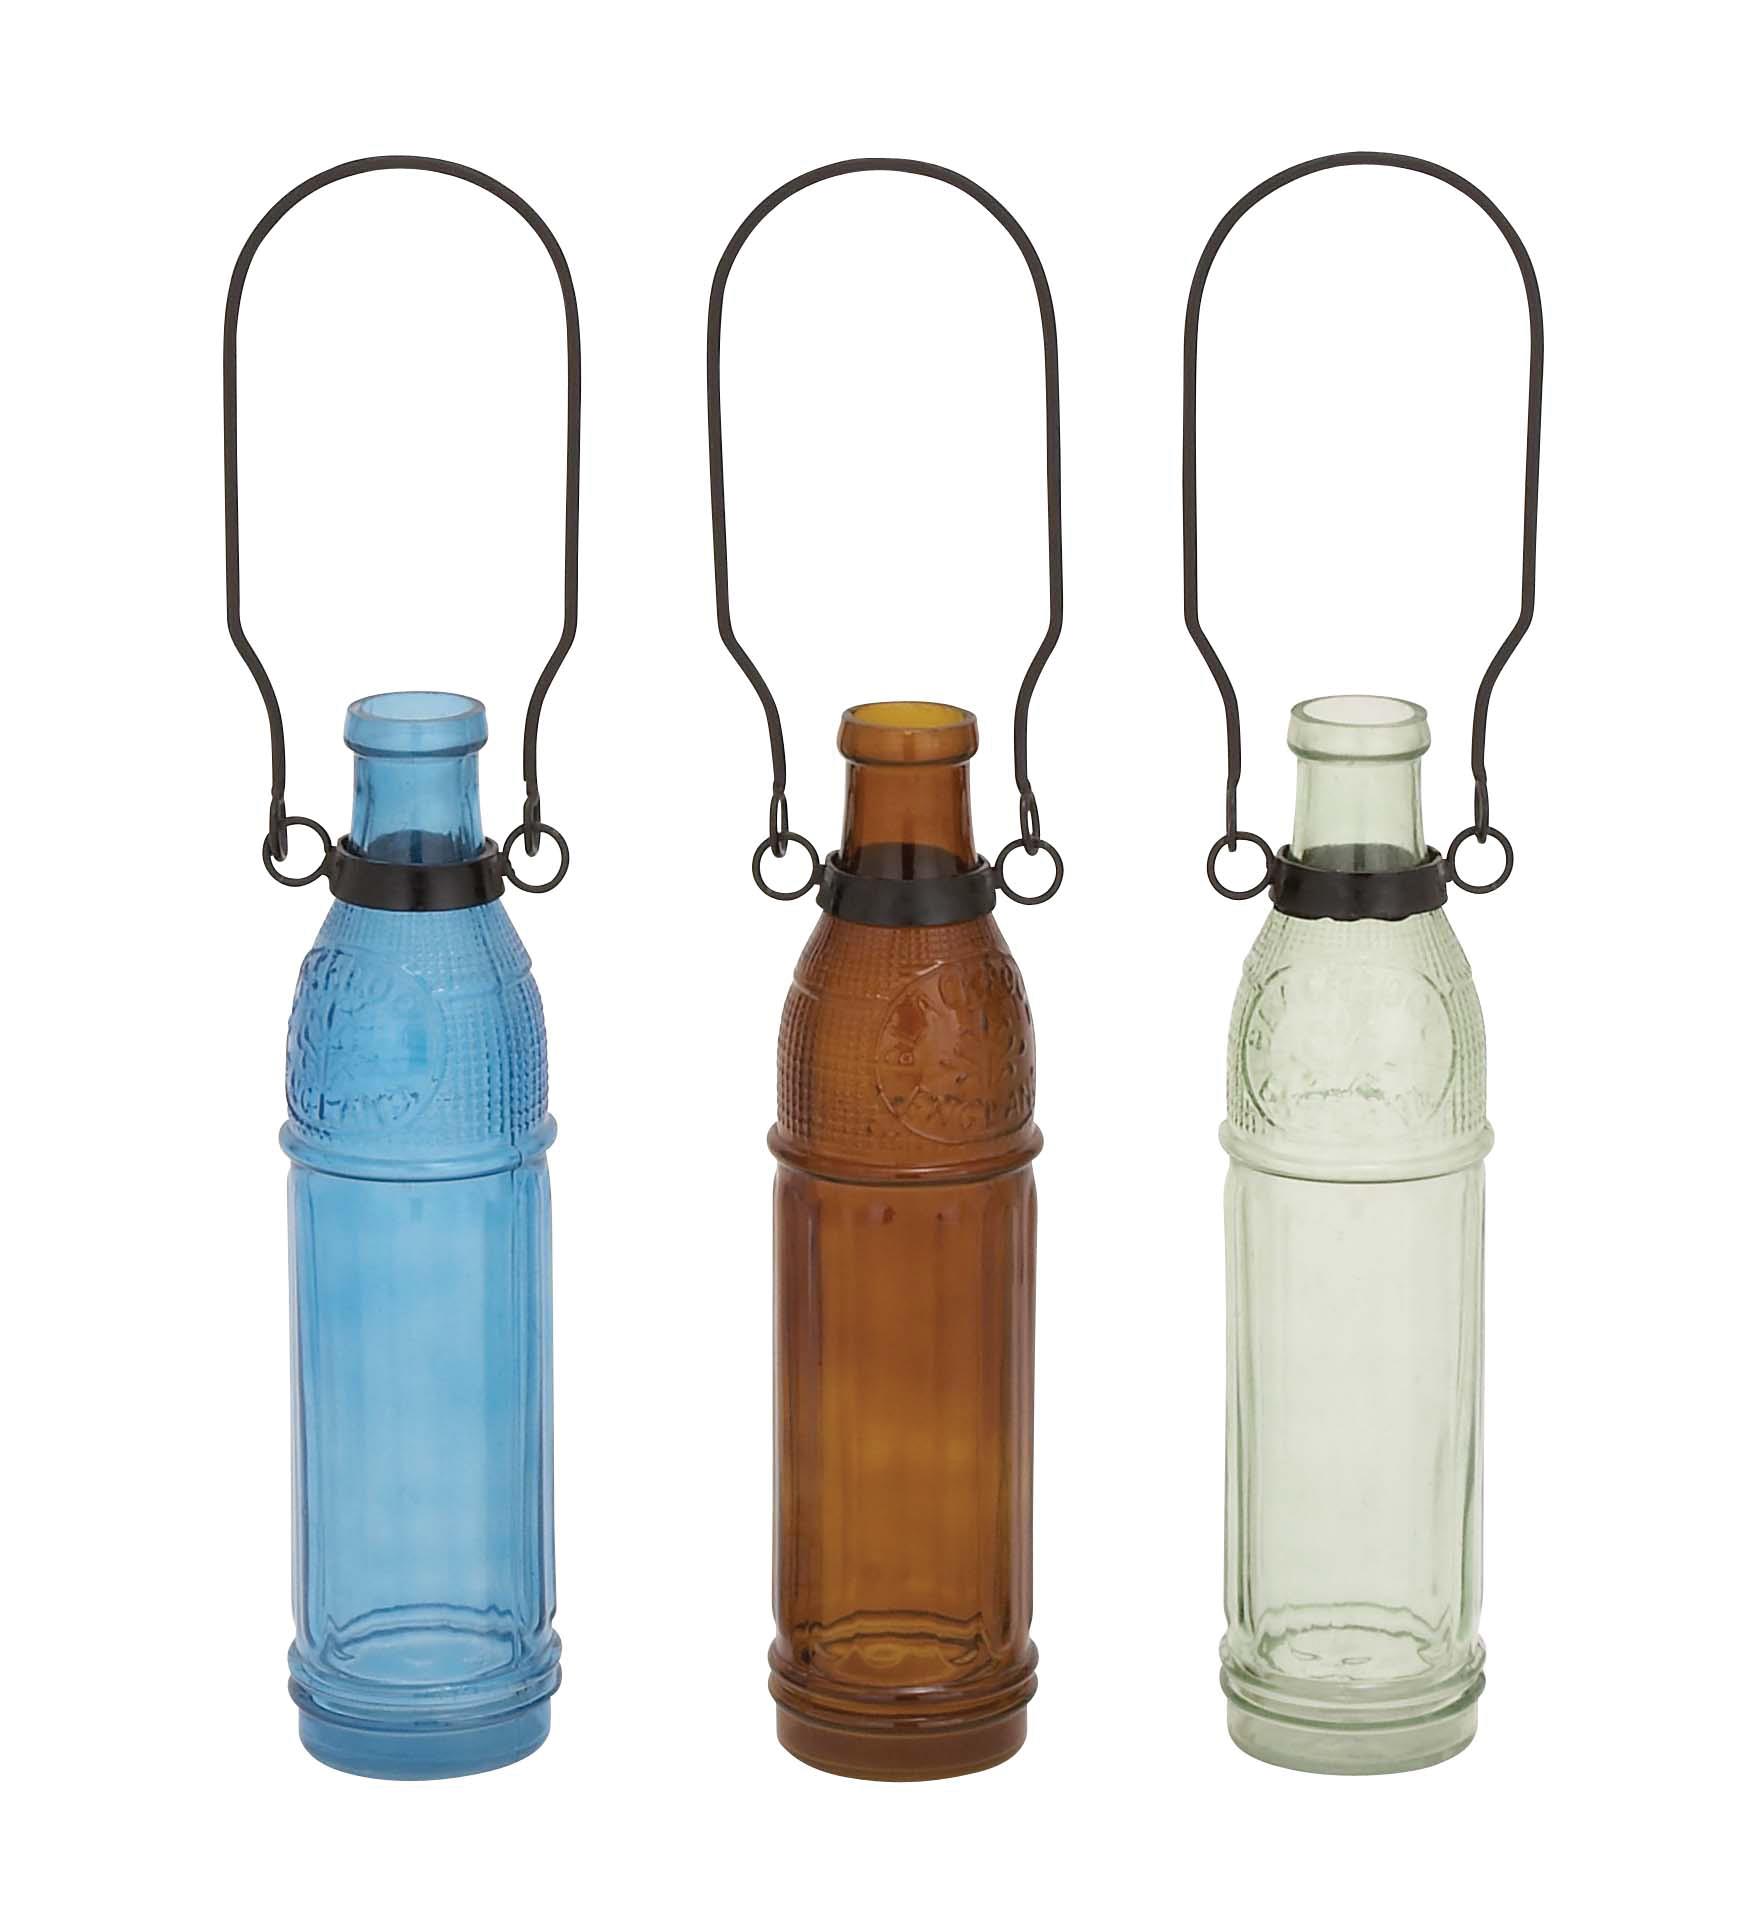 The Simple Glass Metal Bottle 3 Assorted